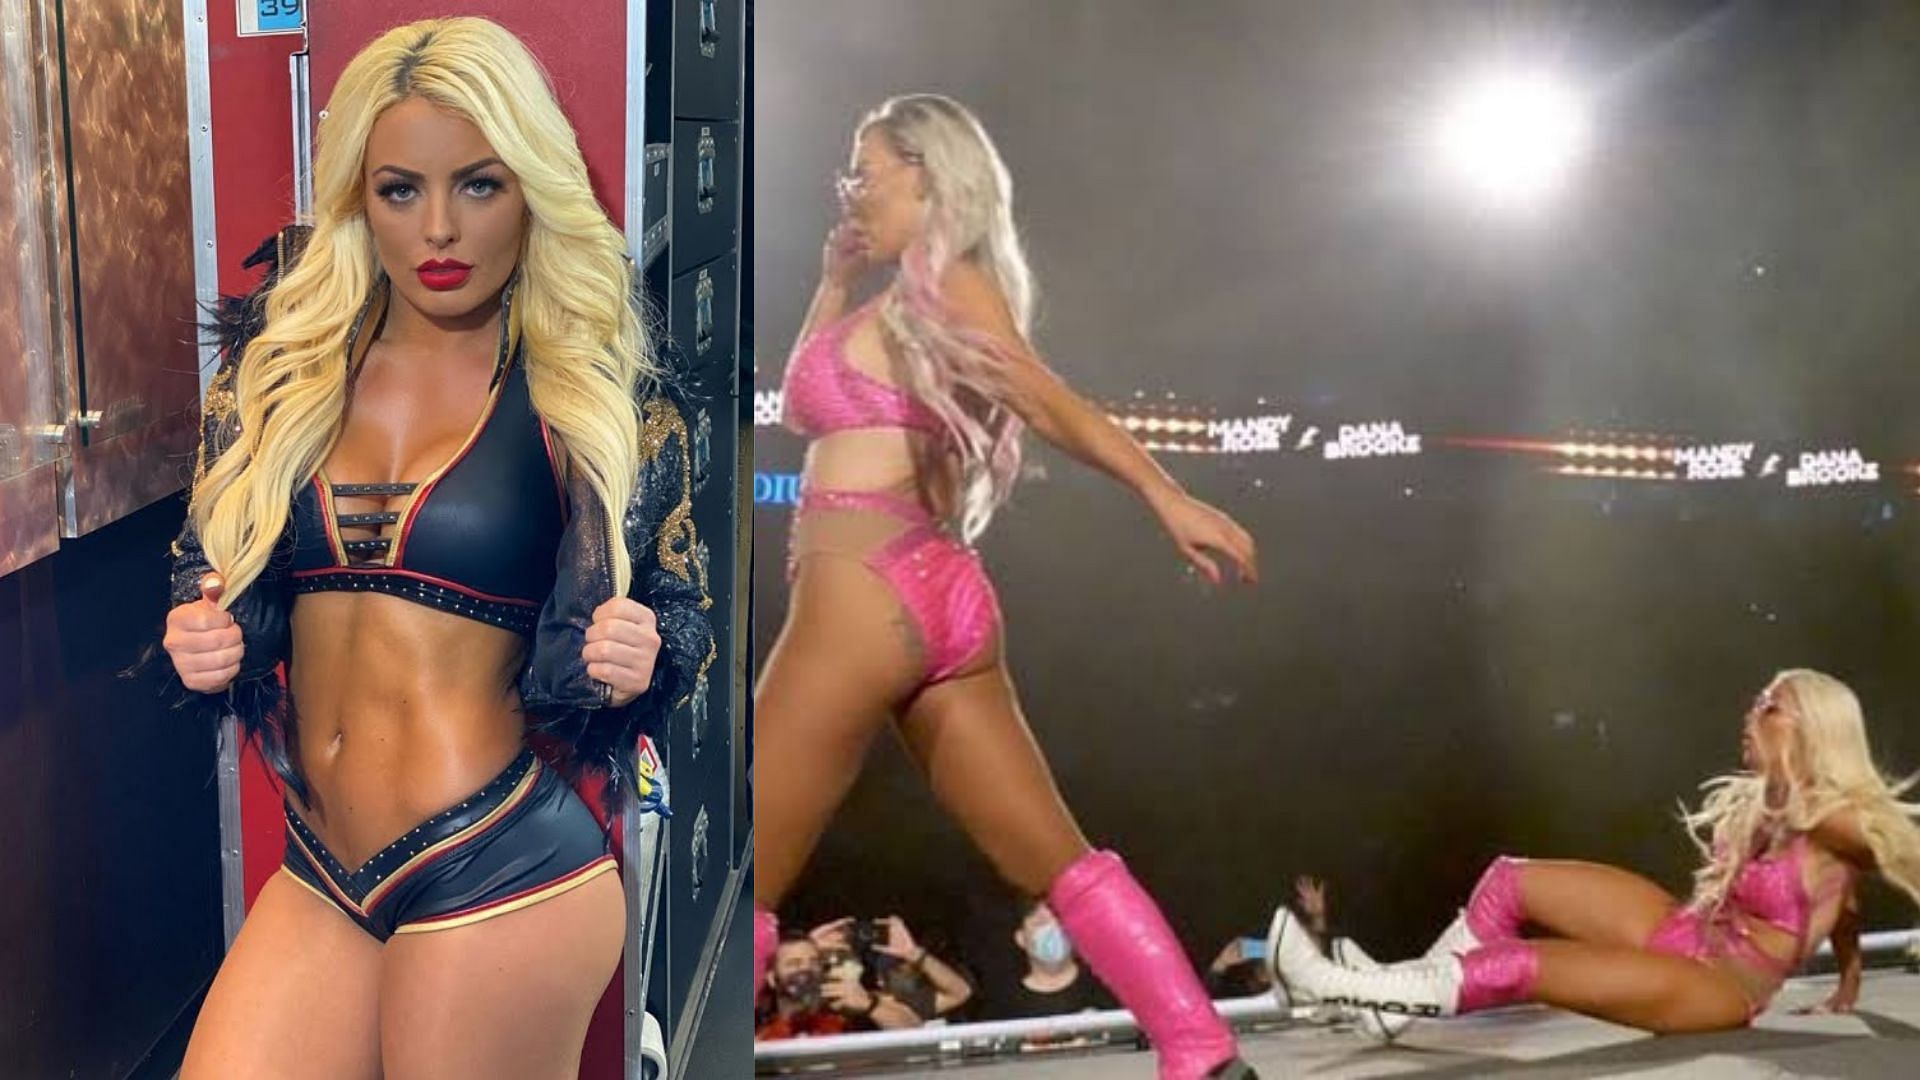 Mandy Rose was in a tag team with Dana Brooke on the main roster